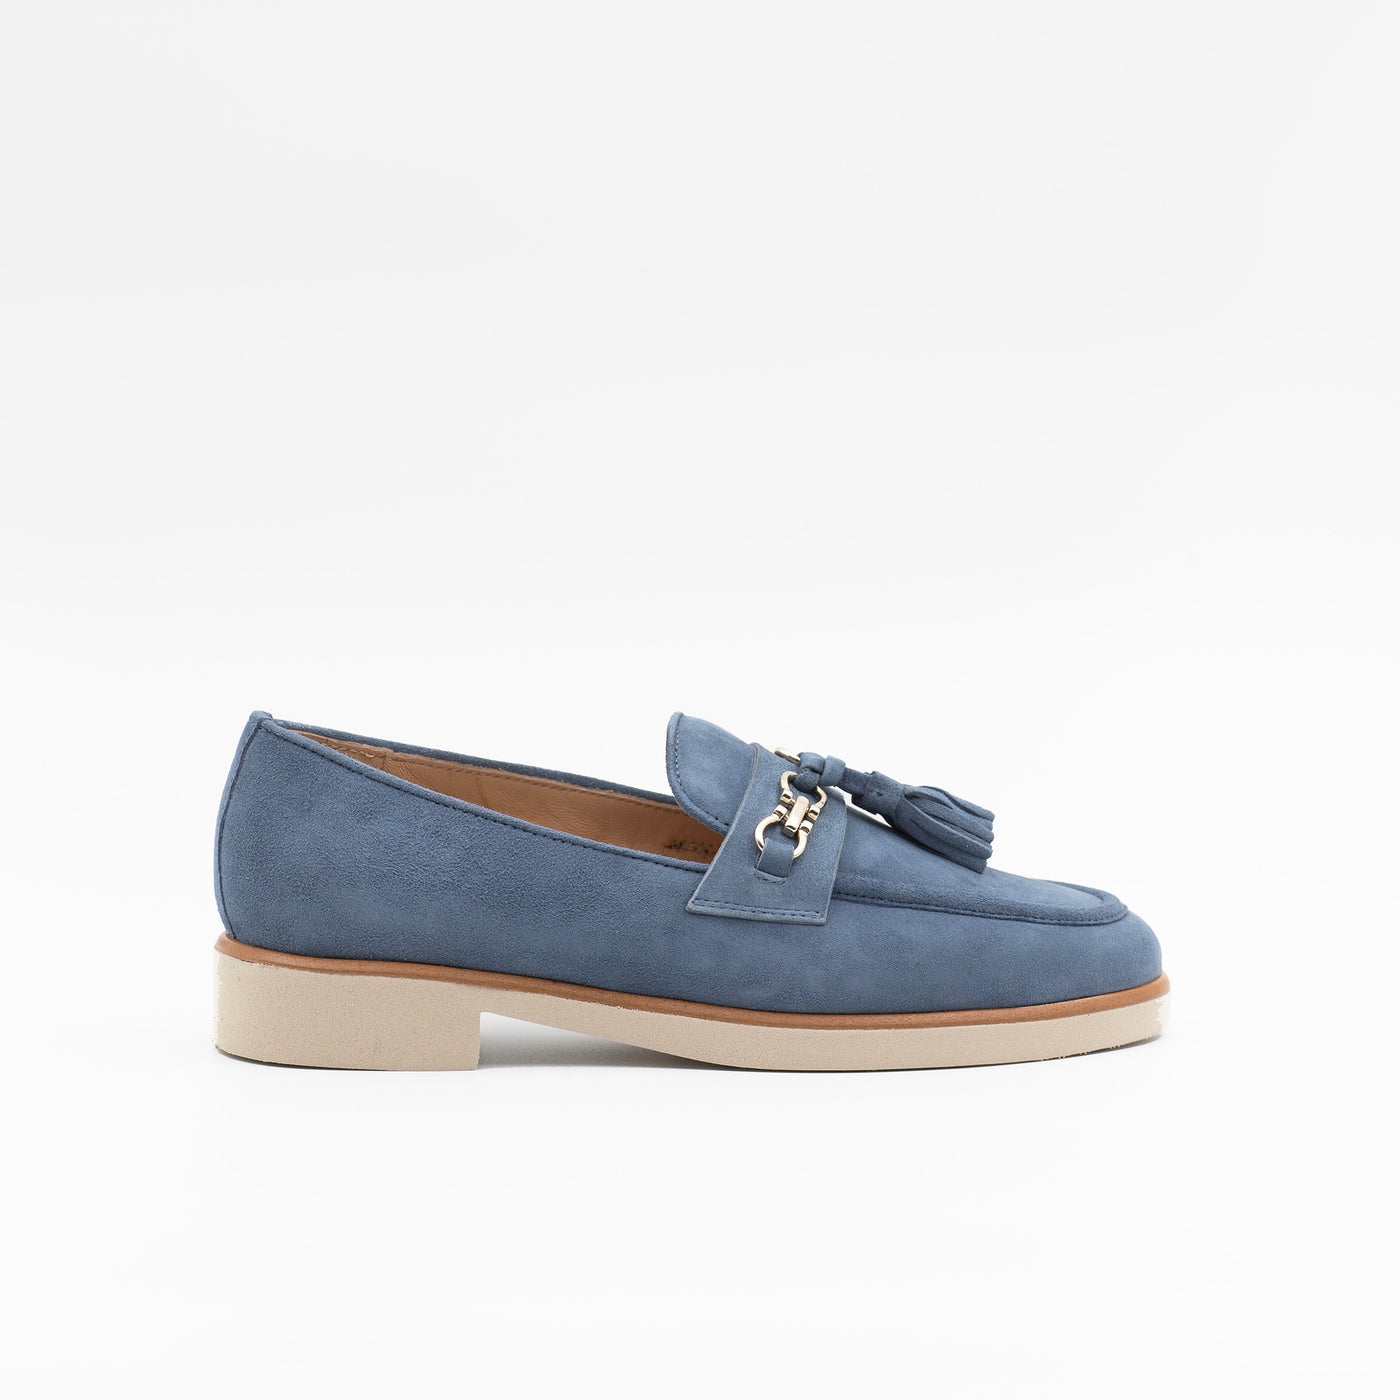 Light blue tassel loafer with rubber sole